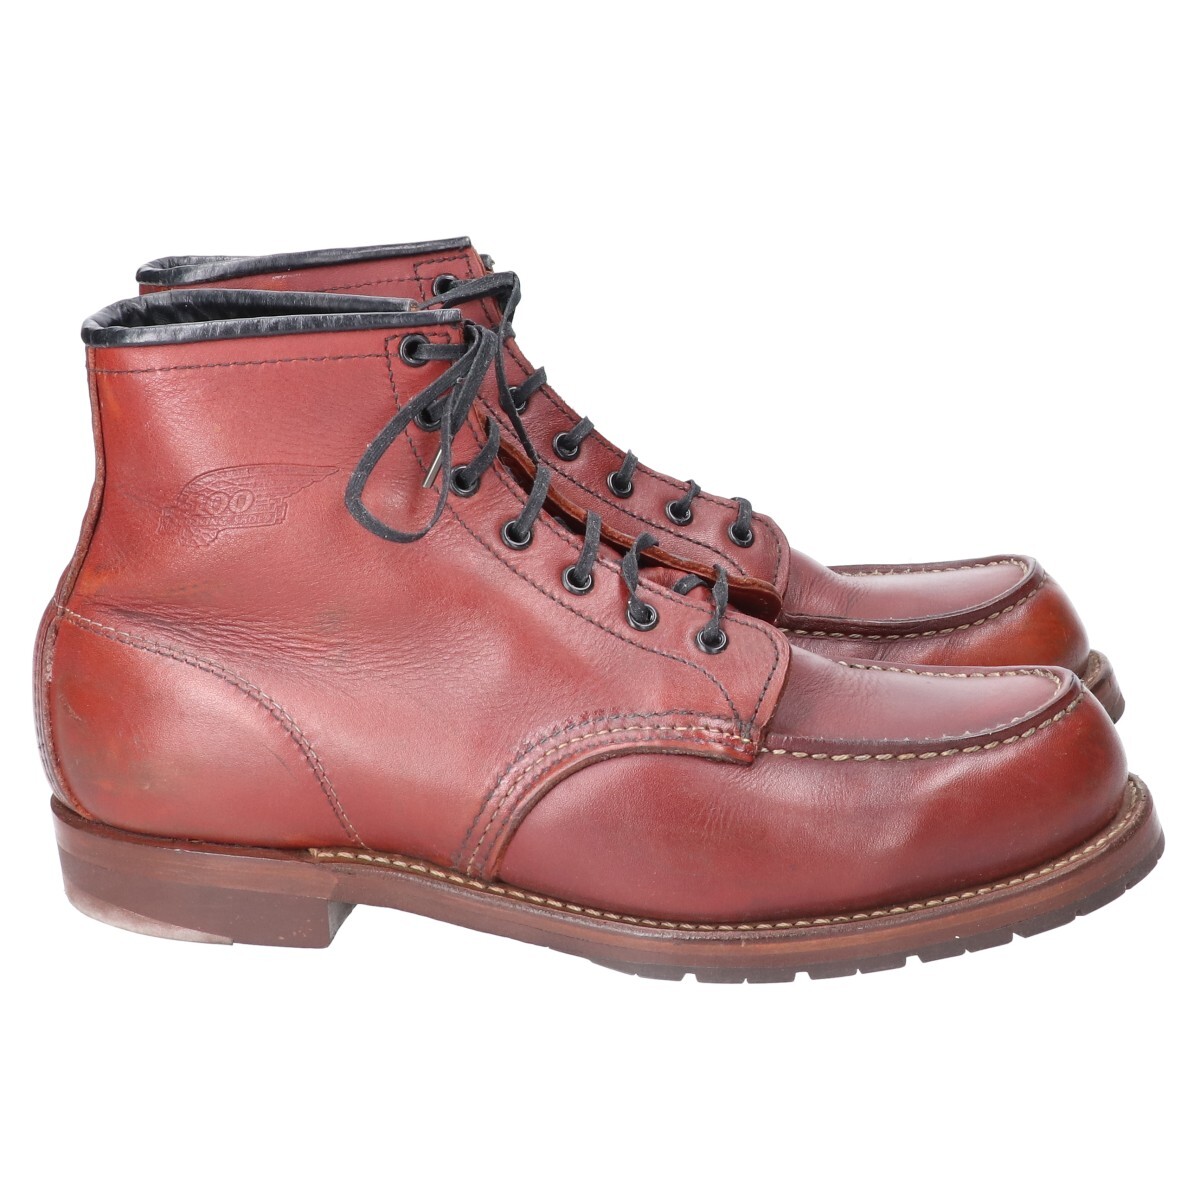 Red Wing Red Wing 100 anniversary limitated model 8282 BECKMAN Beck man moktu boots / shoes 8 1/2D Brown men's 